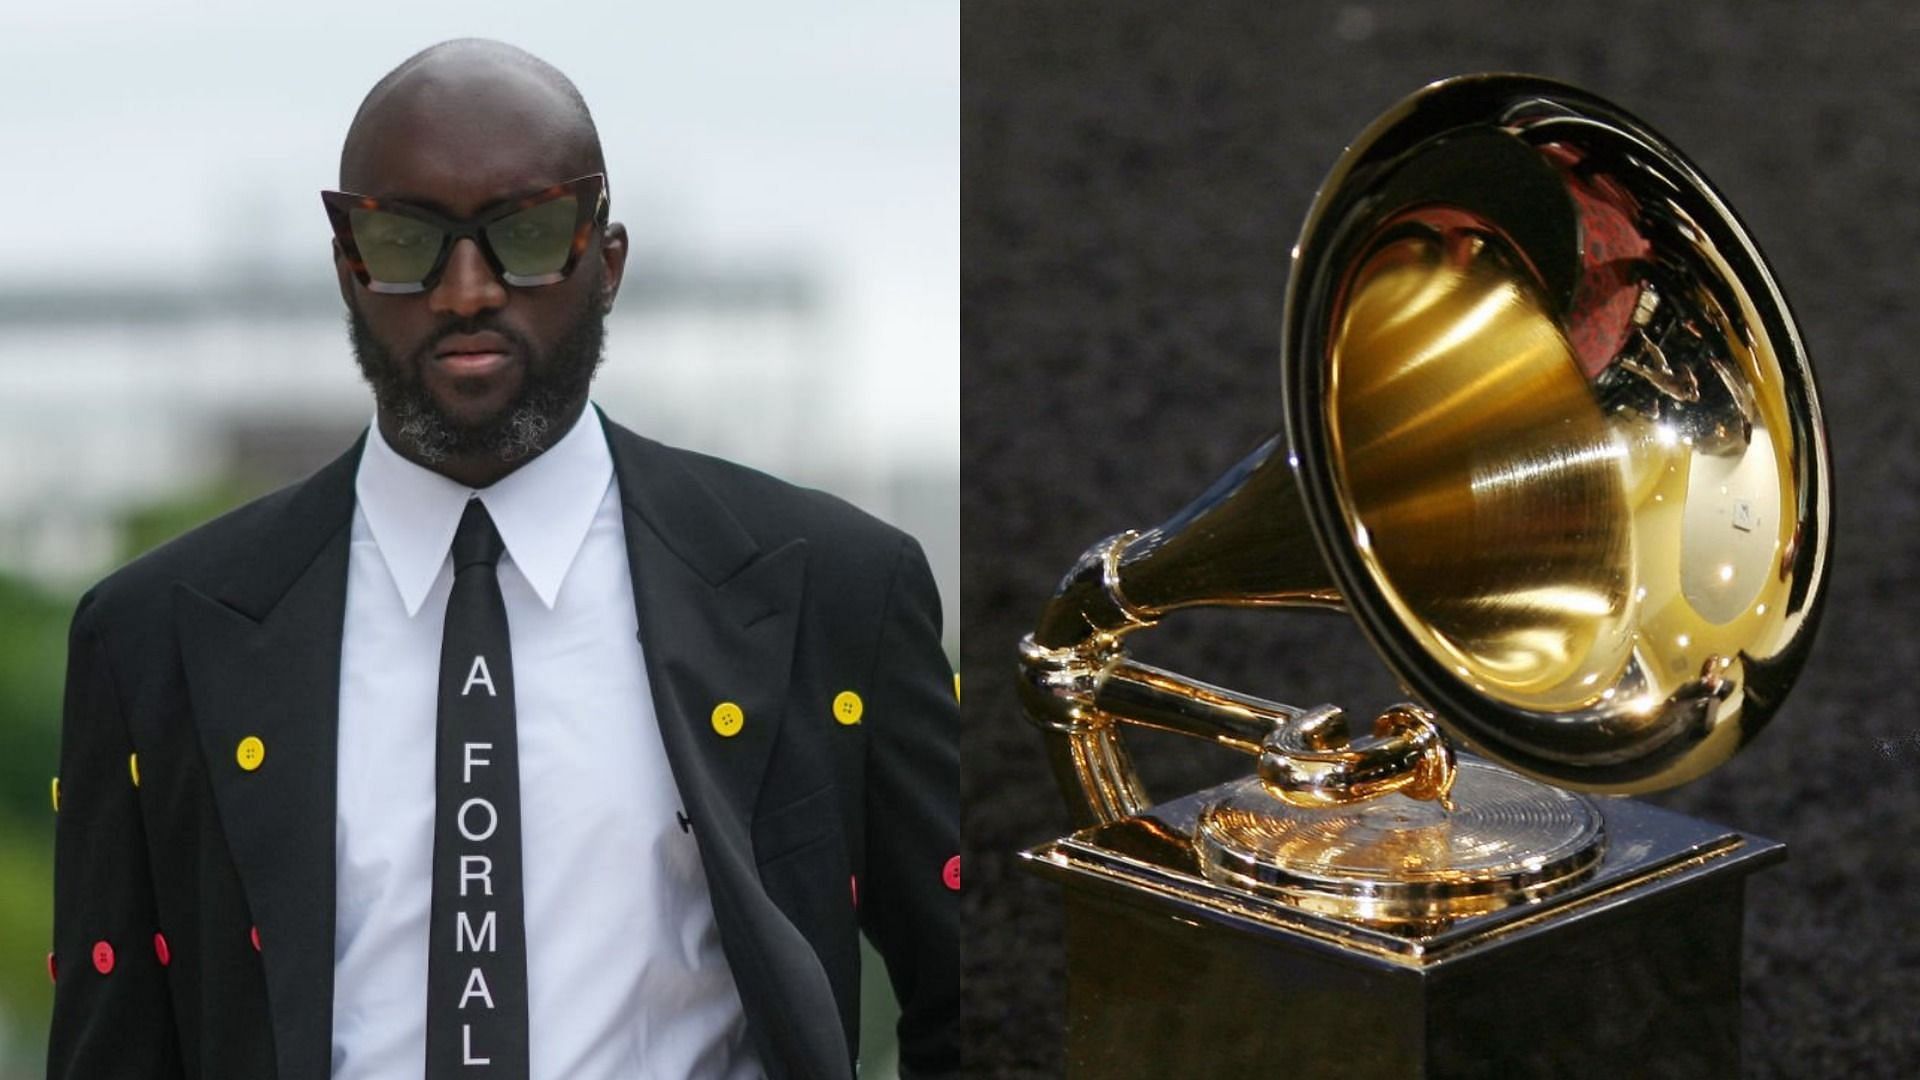 The 2022 Grammys came under fire for labeling Virgil Abloh a &ldquo;Hip Hop fashion designer (Image via Edward Berthelot/Getty Images and Gabriel Bouys/Getty Images)